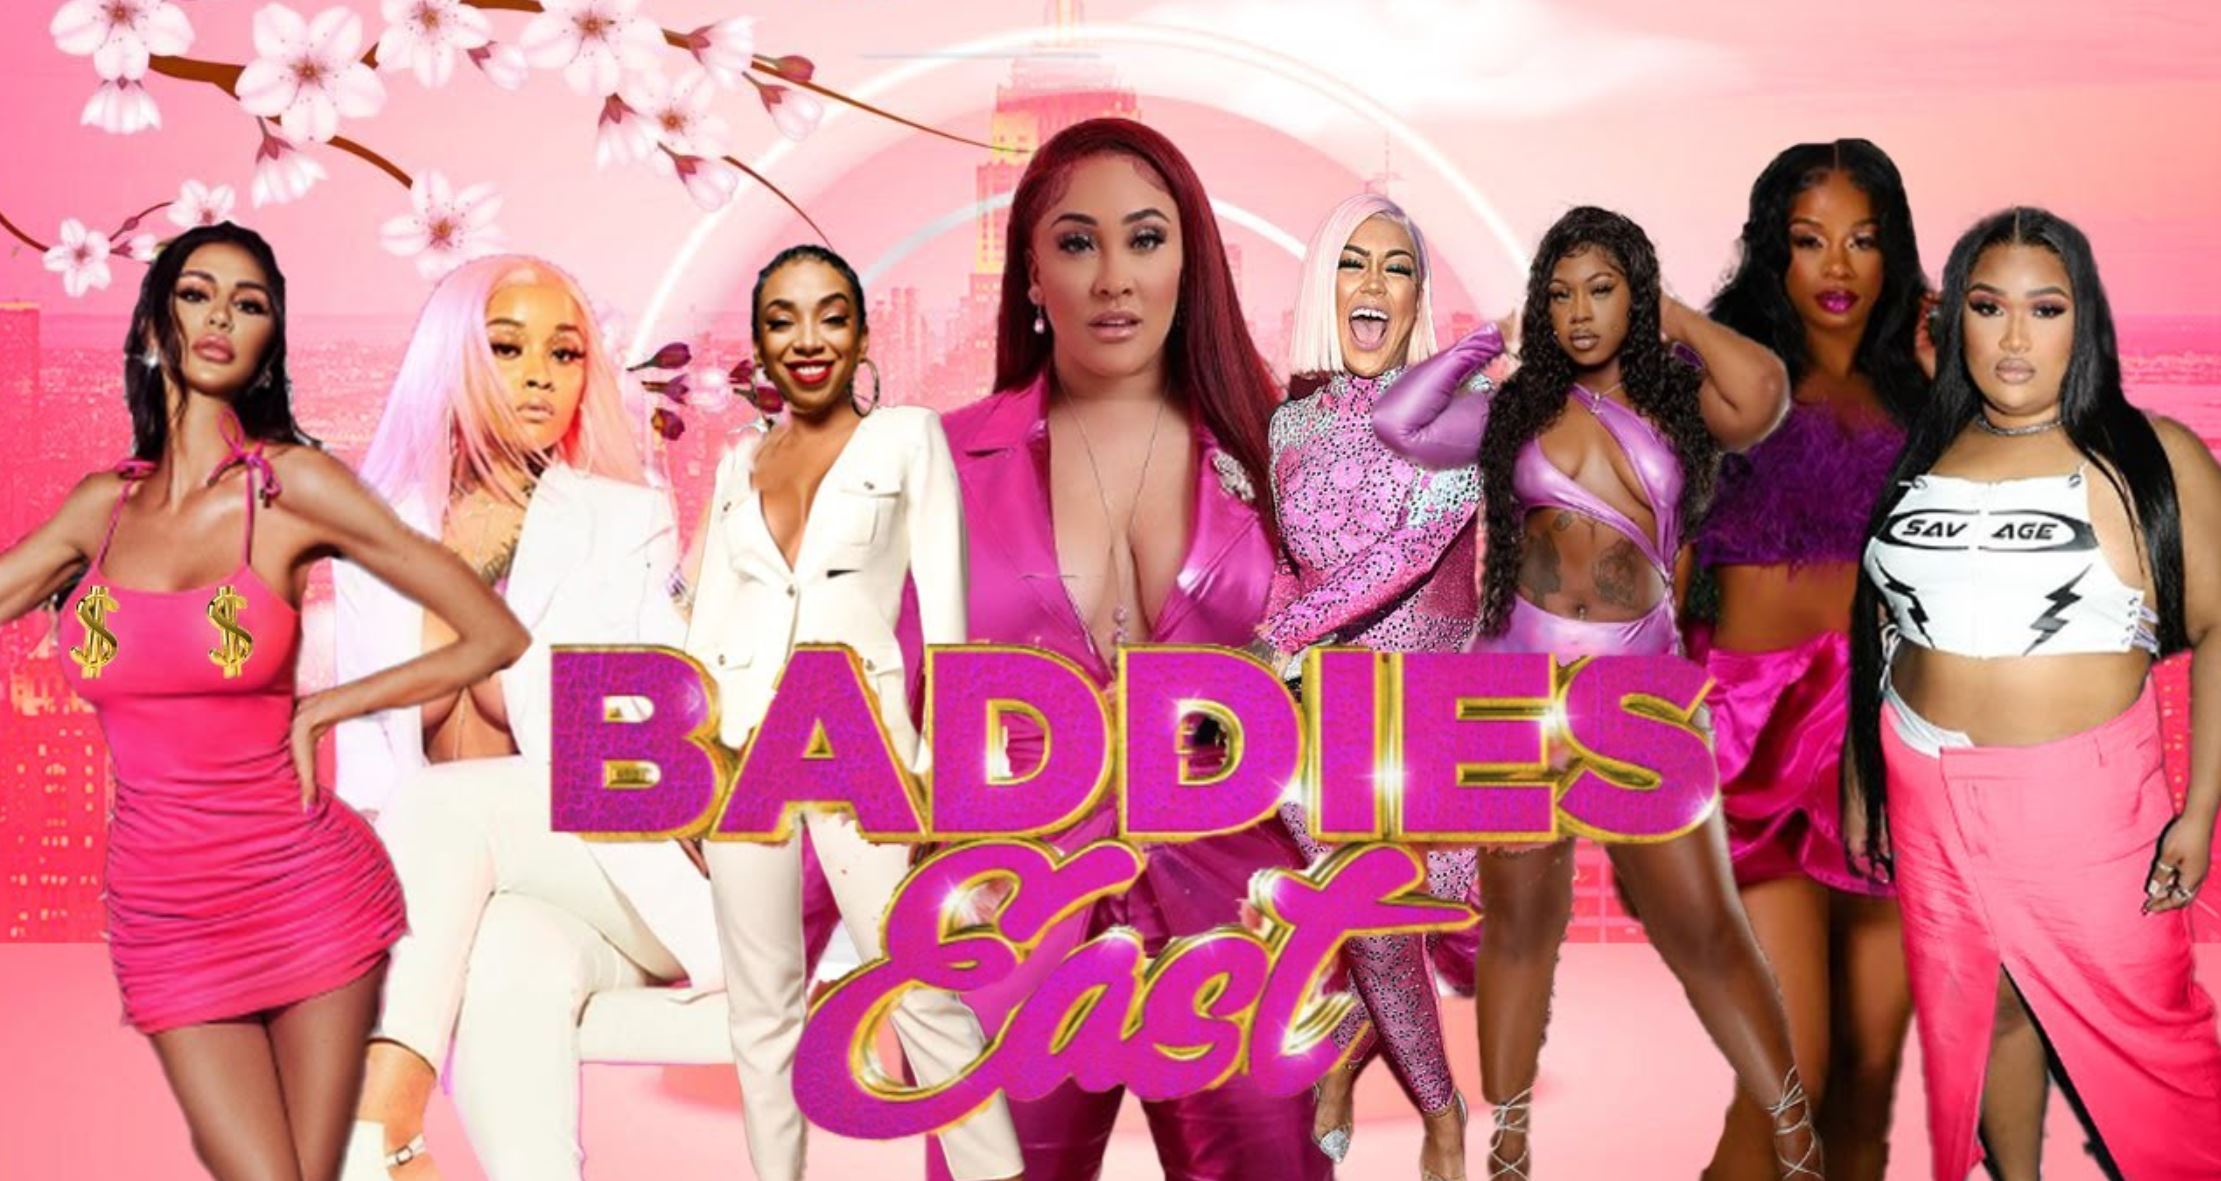 Baddies east auditions part 2